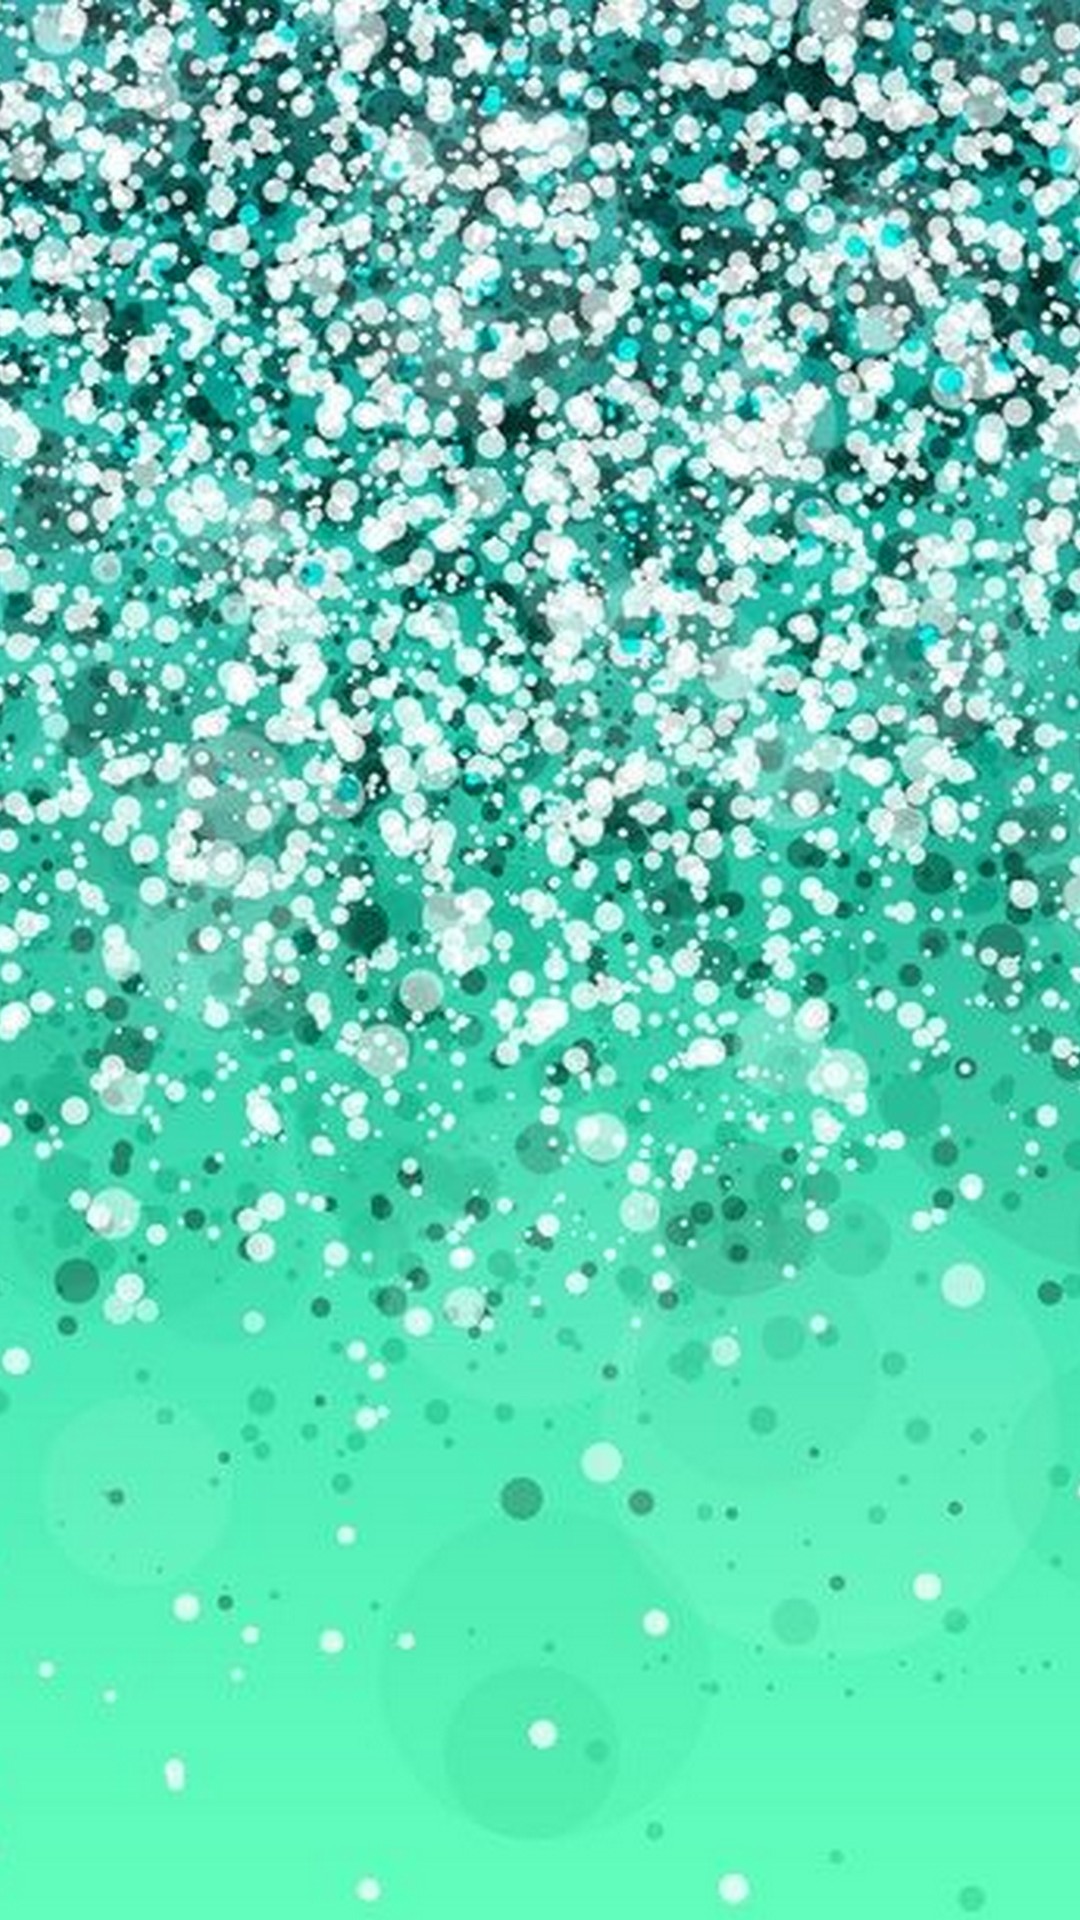 Green Colour Backgrounds For Android With Image Resolution - Mint Green  Glitter Background - 1080x1920 Wallpaper 